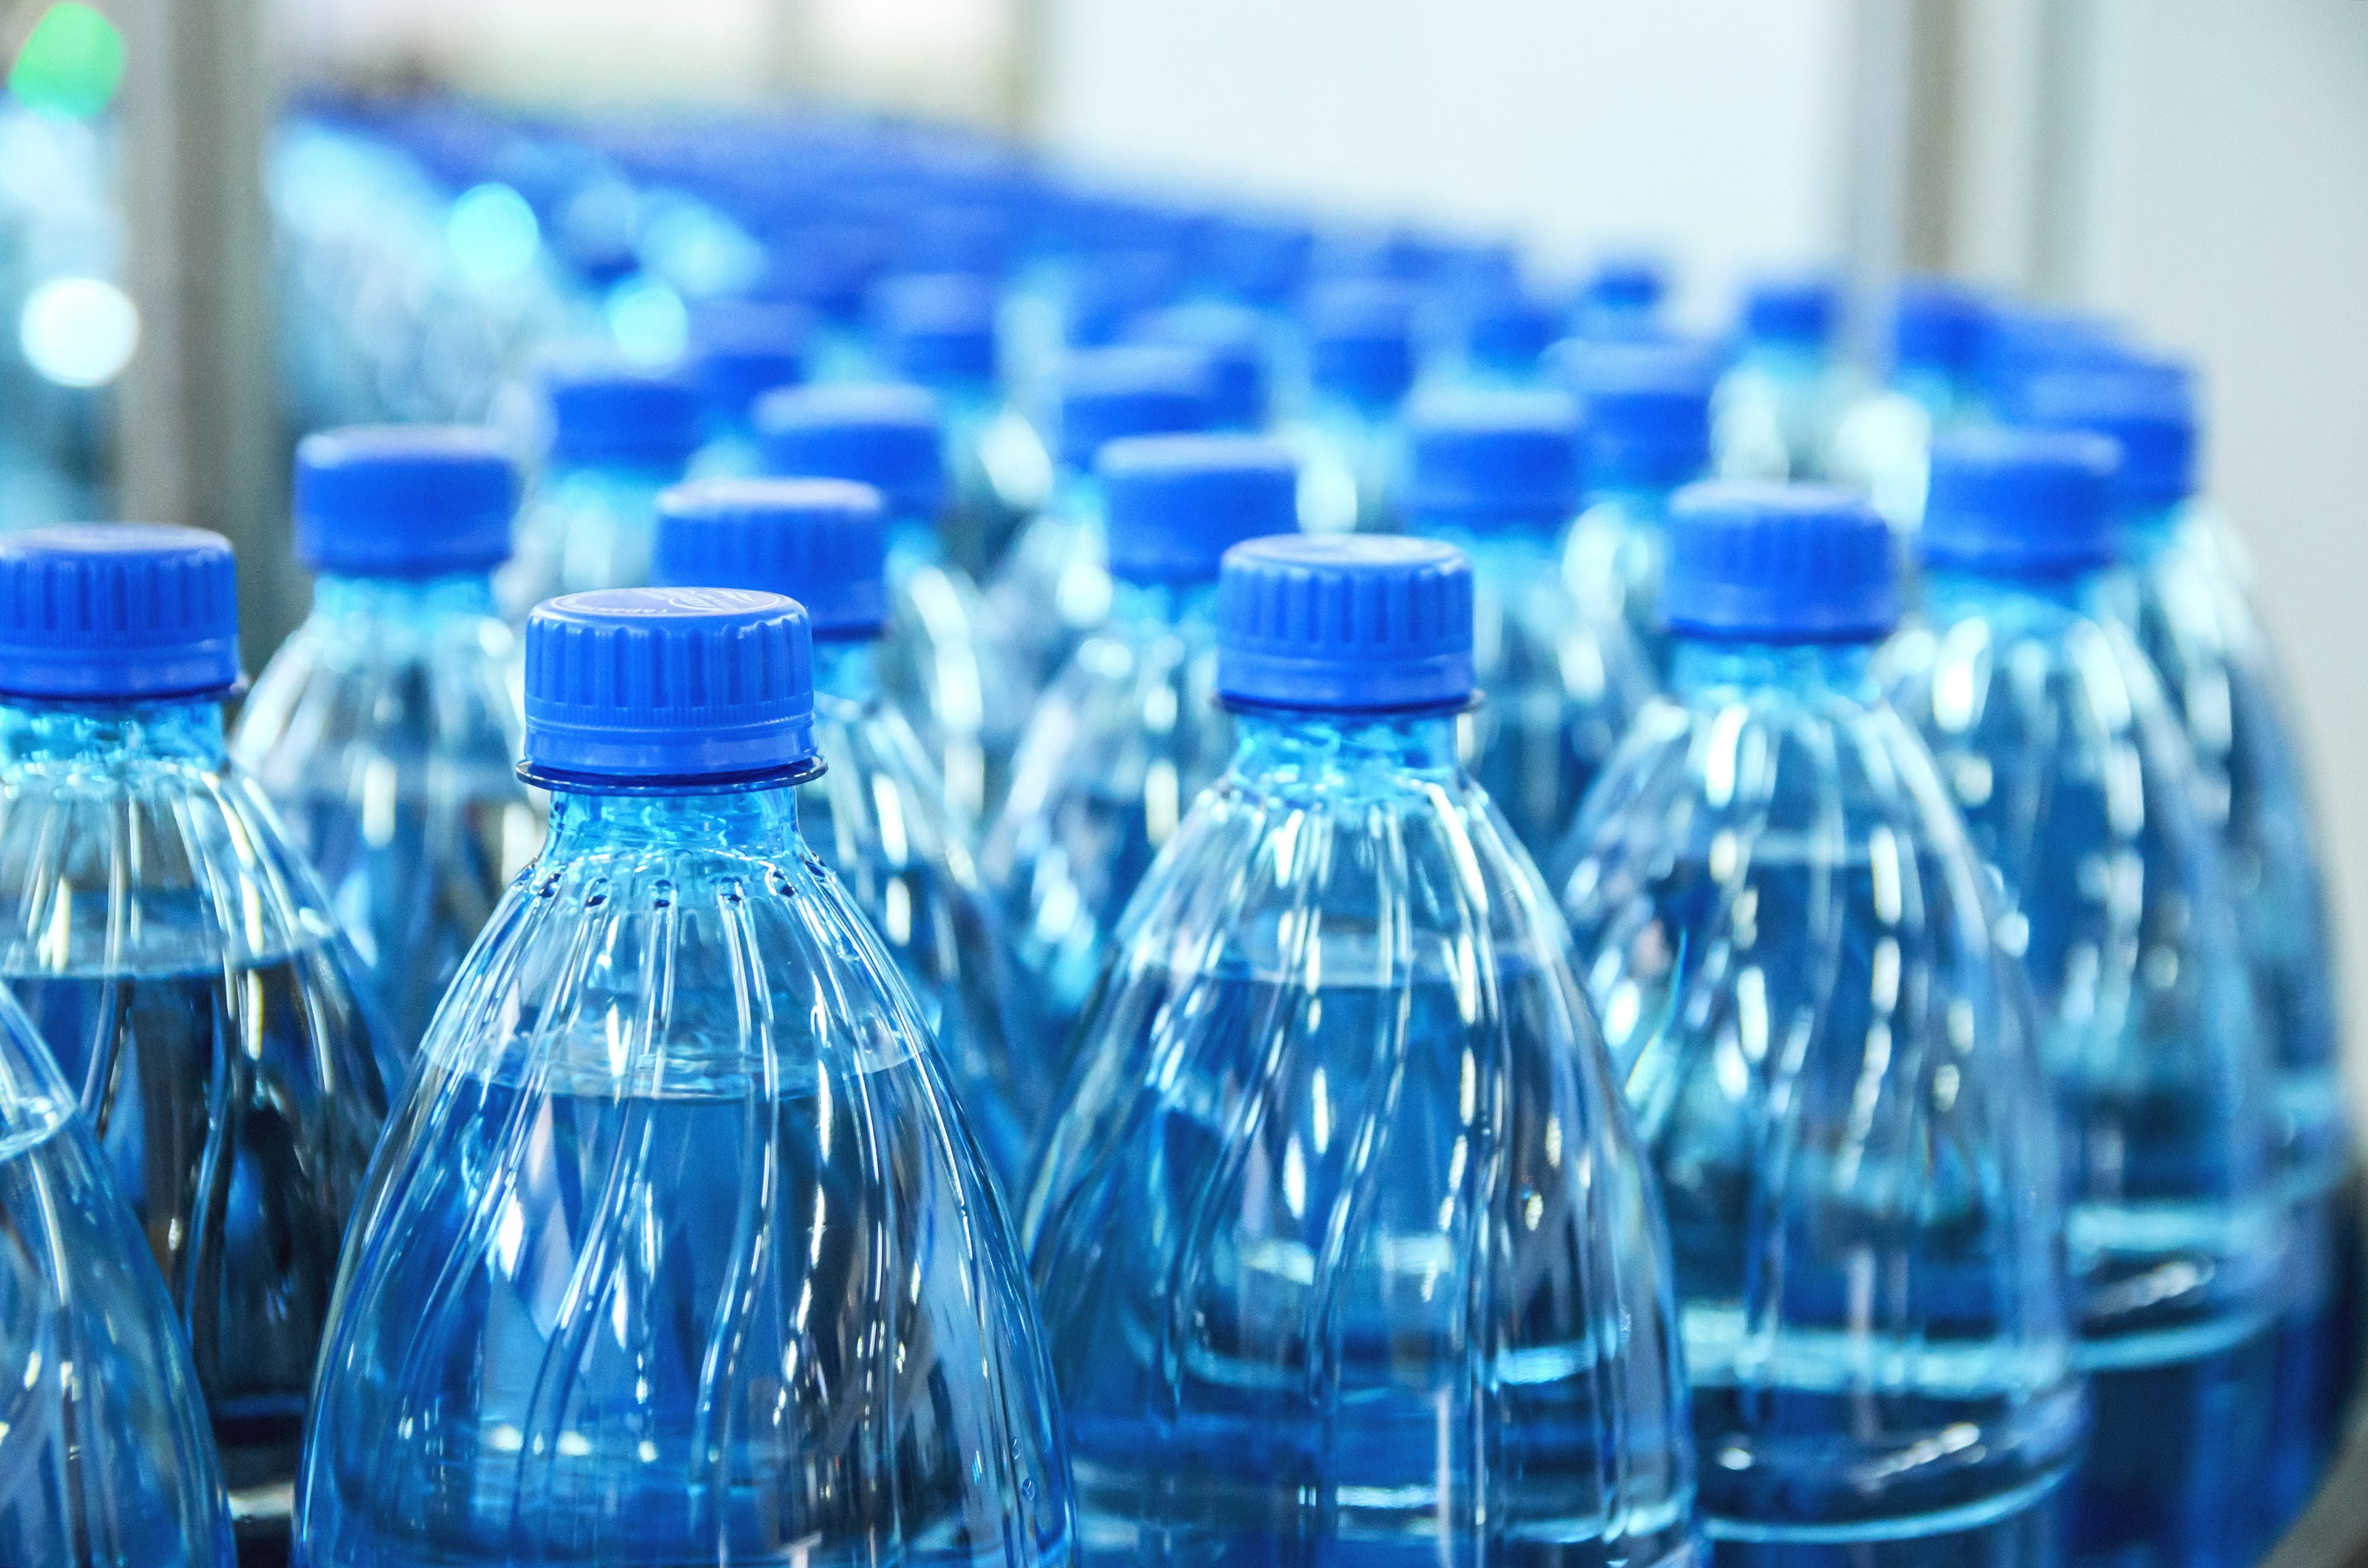 Hong Kong on Monday enforced a ban on the use of single-use plastic products including bottled water, toothbrushes and toothpaste at establishments such as hotels. Photo: Shutterstock